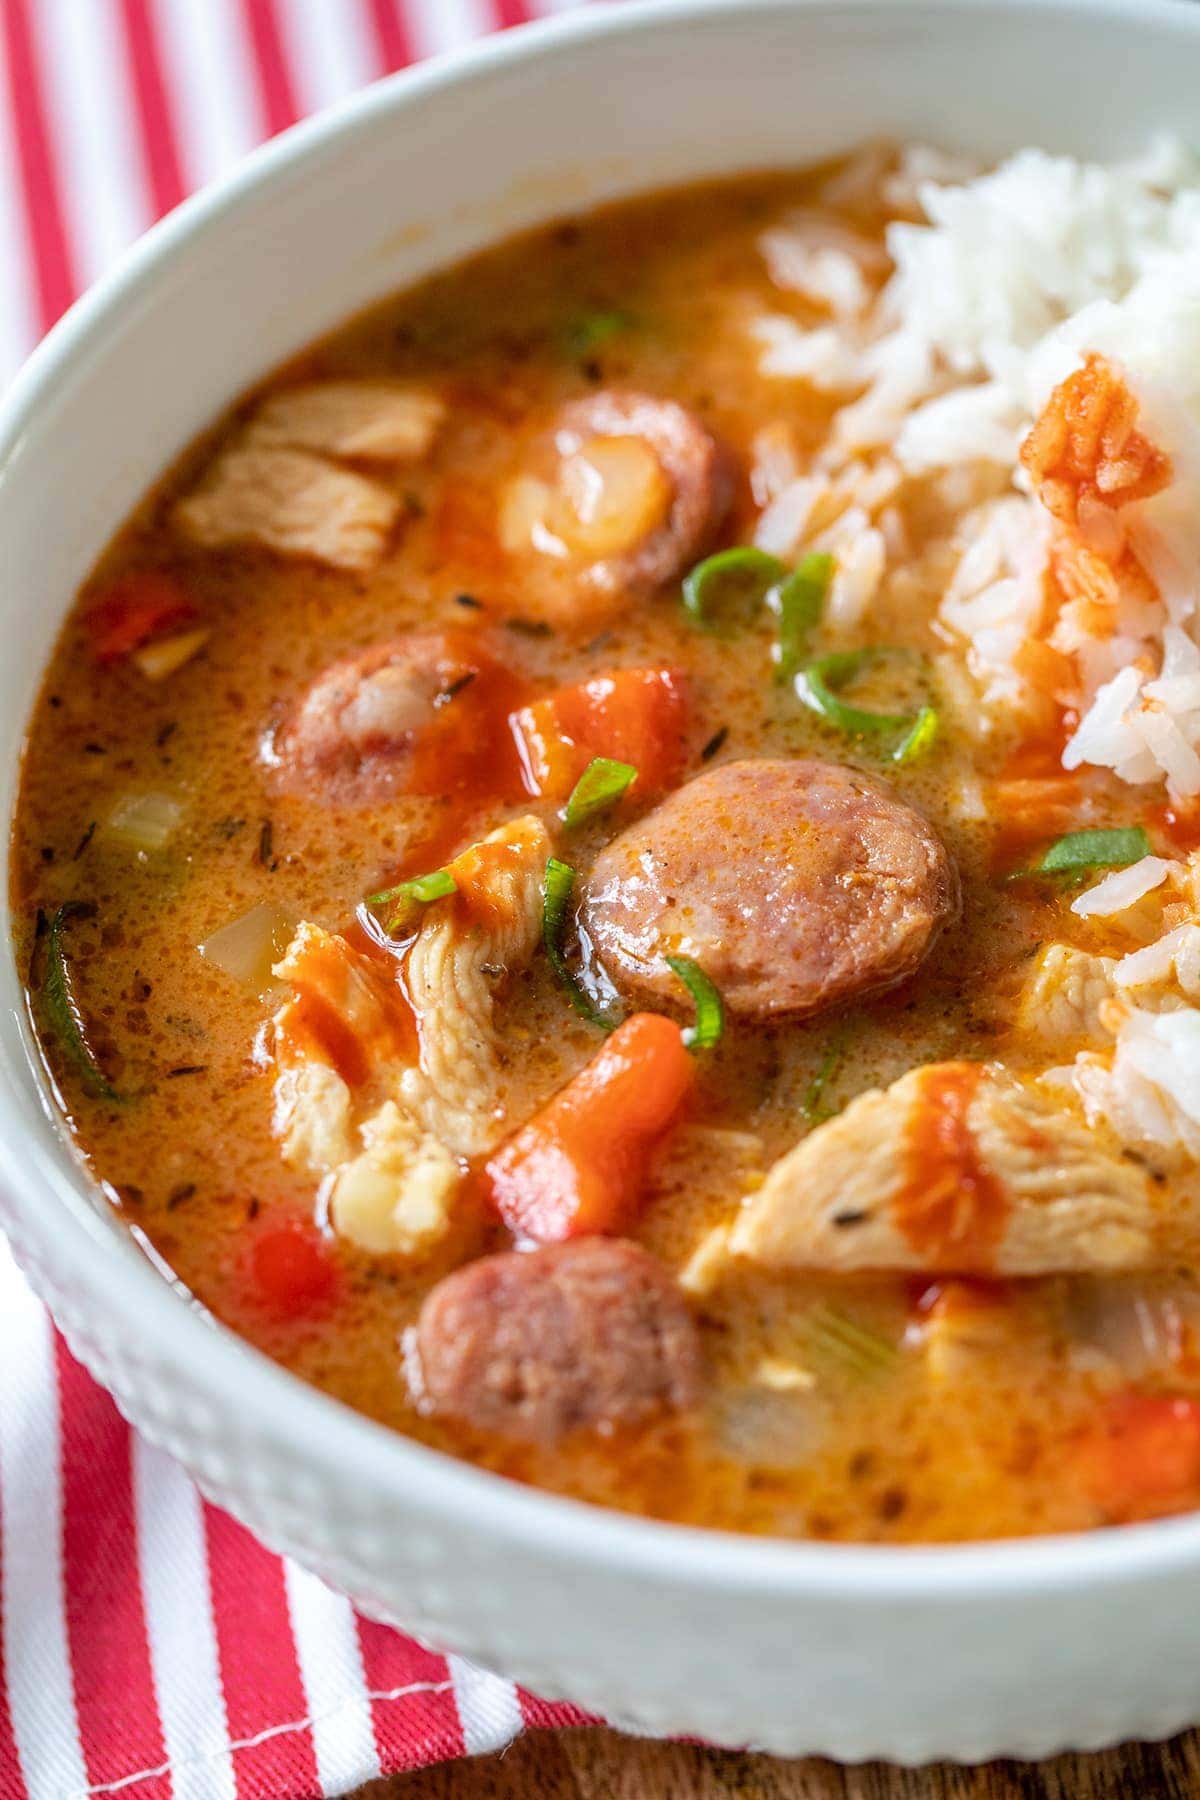 https://www.freutcake.com/wp-content/uploads/2020/05/Easy-Chicken-and-Sausage-Gumbo-3.jpg